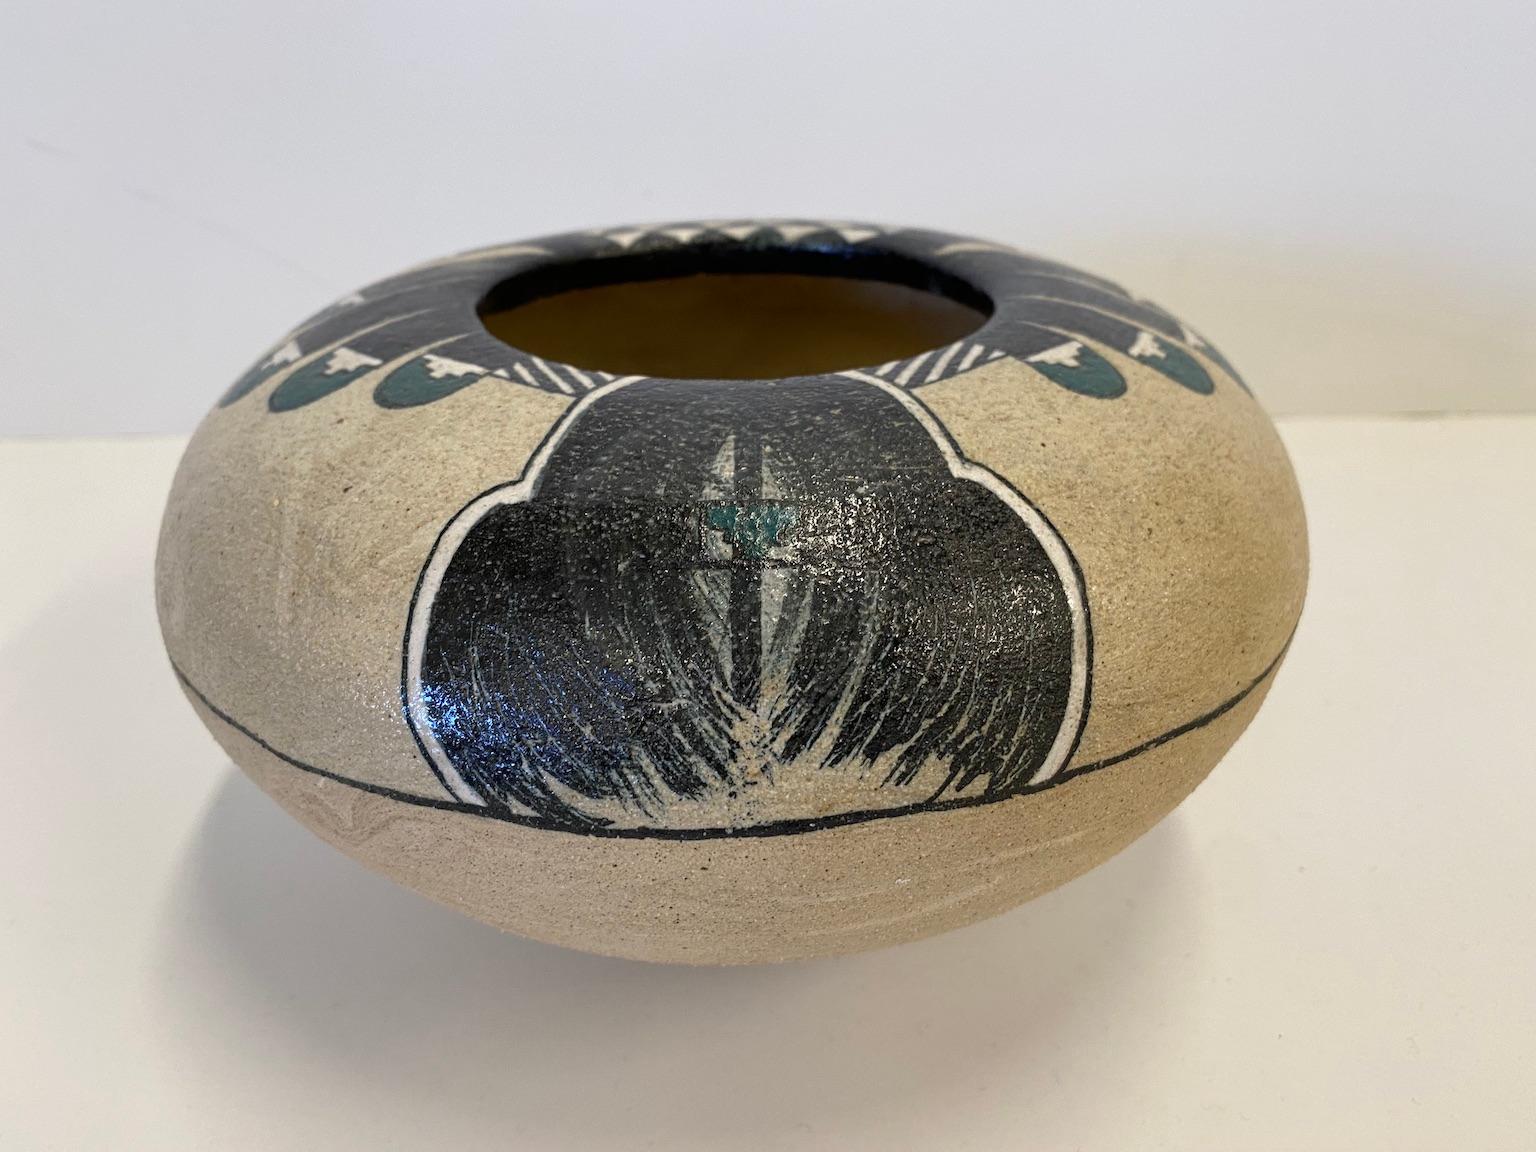 This is a fired and glazed clay pot, painted with a Native American inspired design, circa 1988, by American artist Gary Dale Campbell (1938-2002).